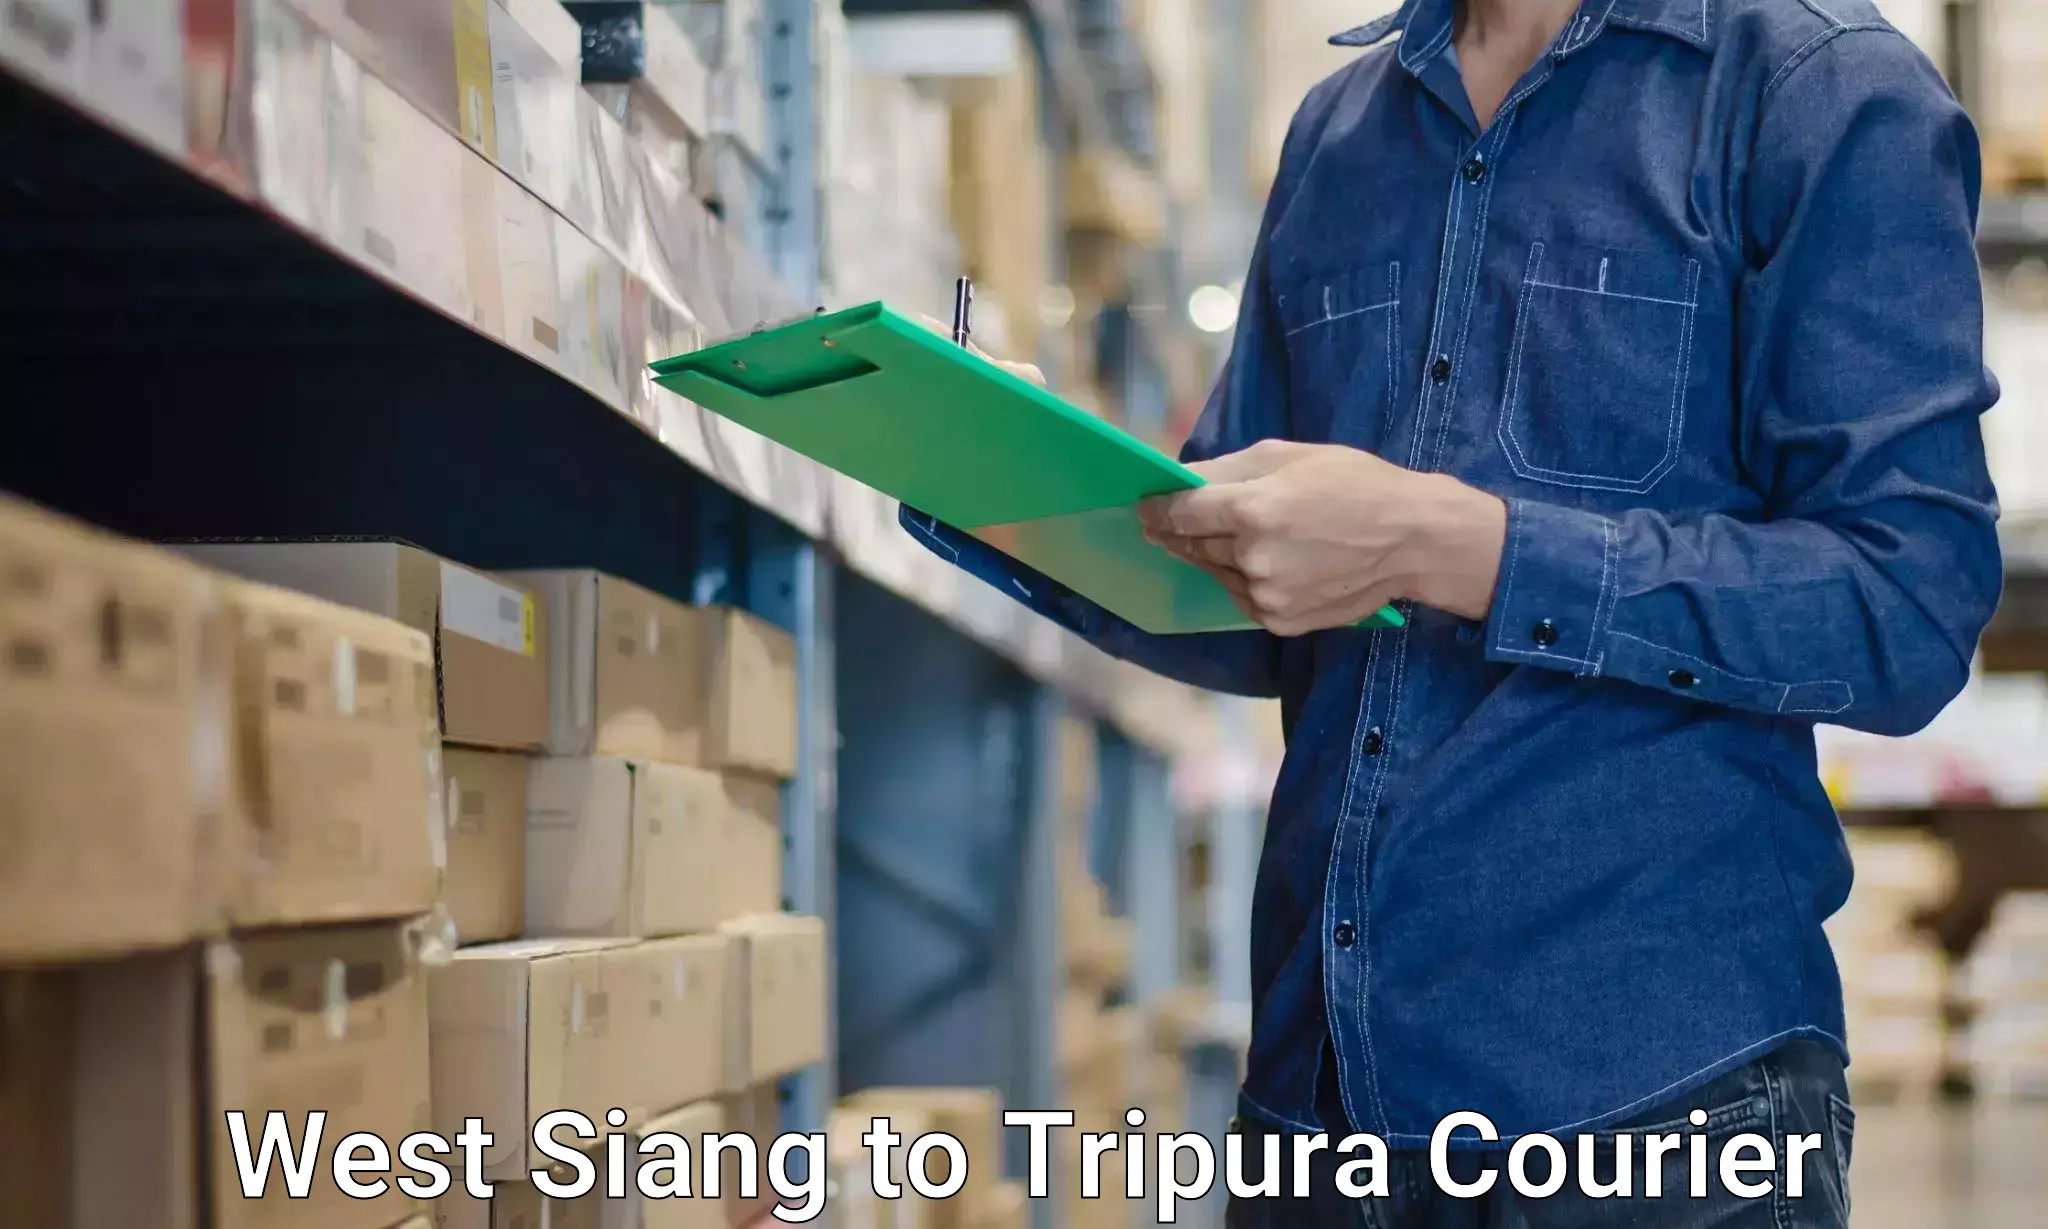 Furniture transport specialists in West Siang to Udaipur Tripura